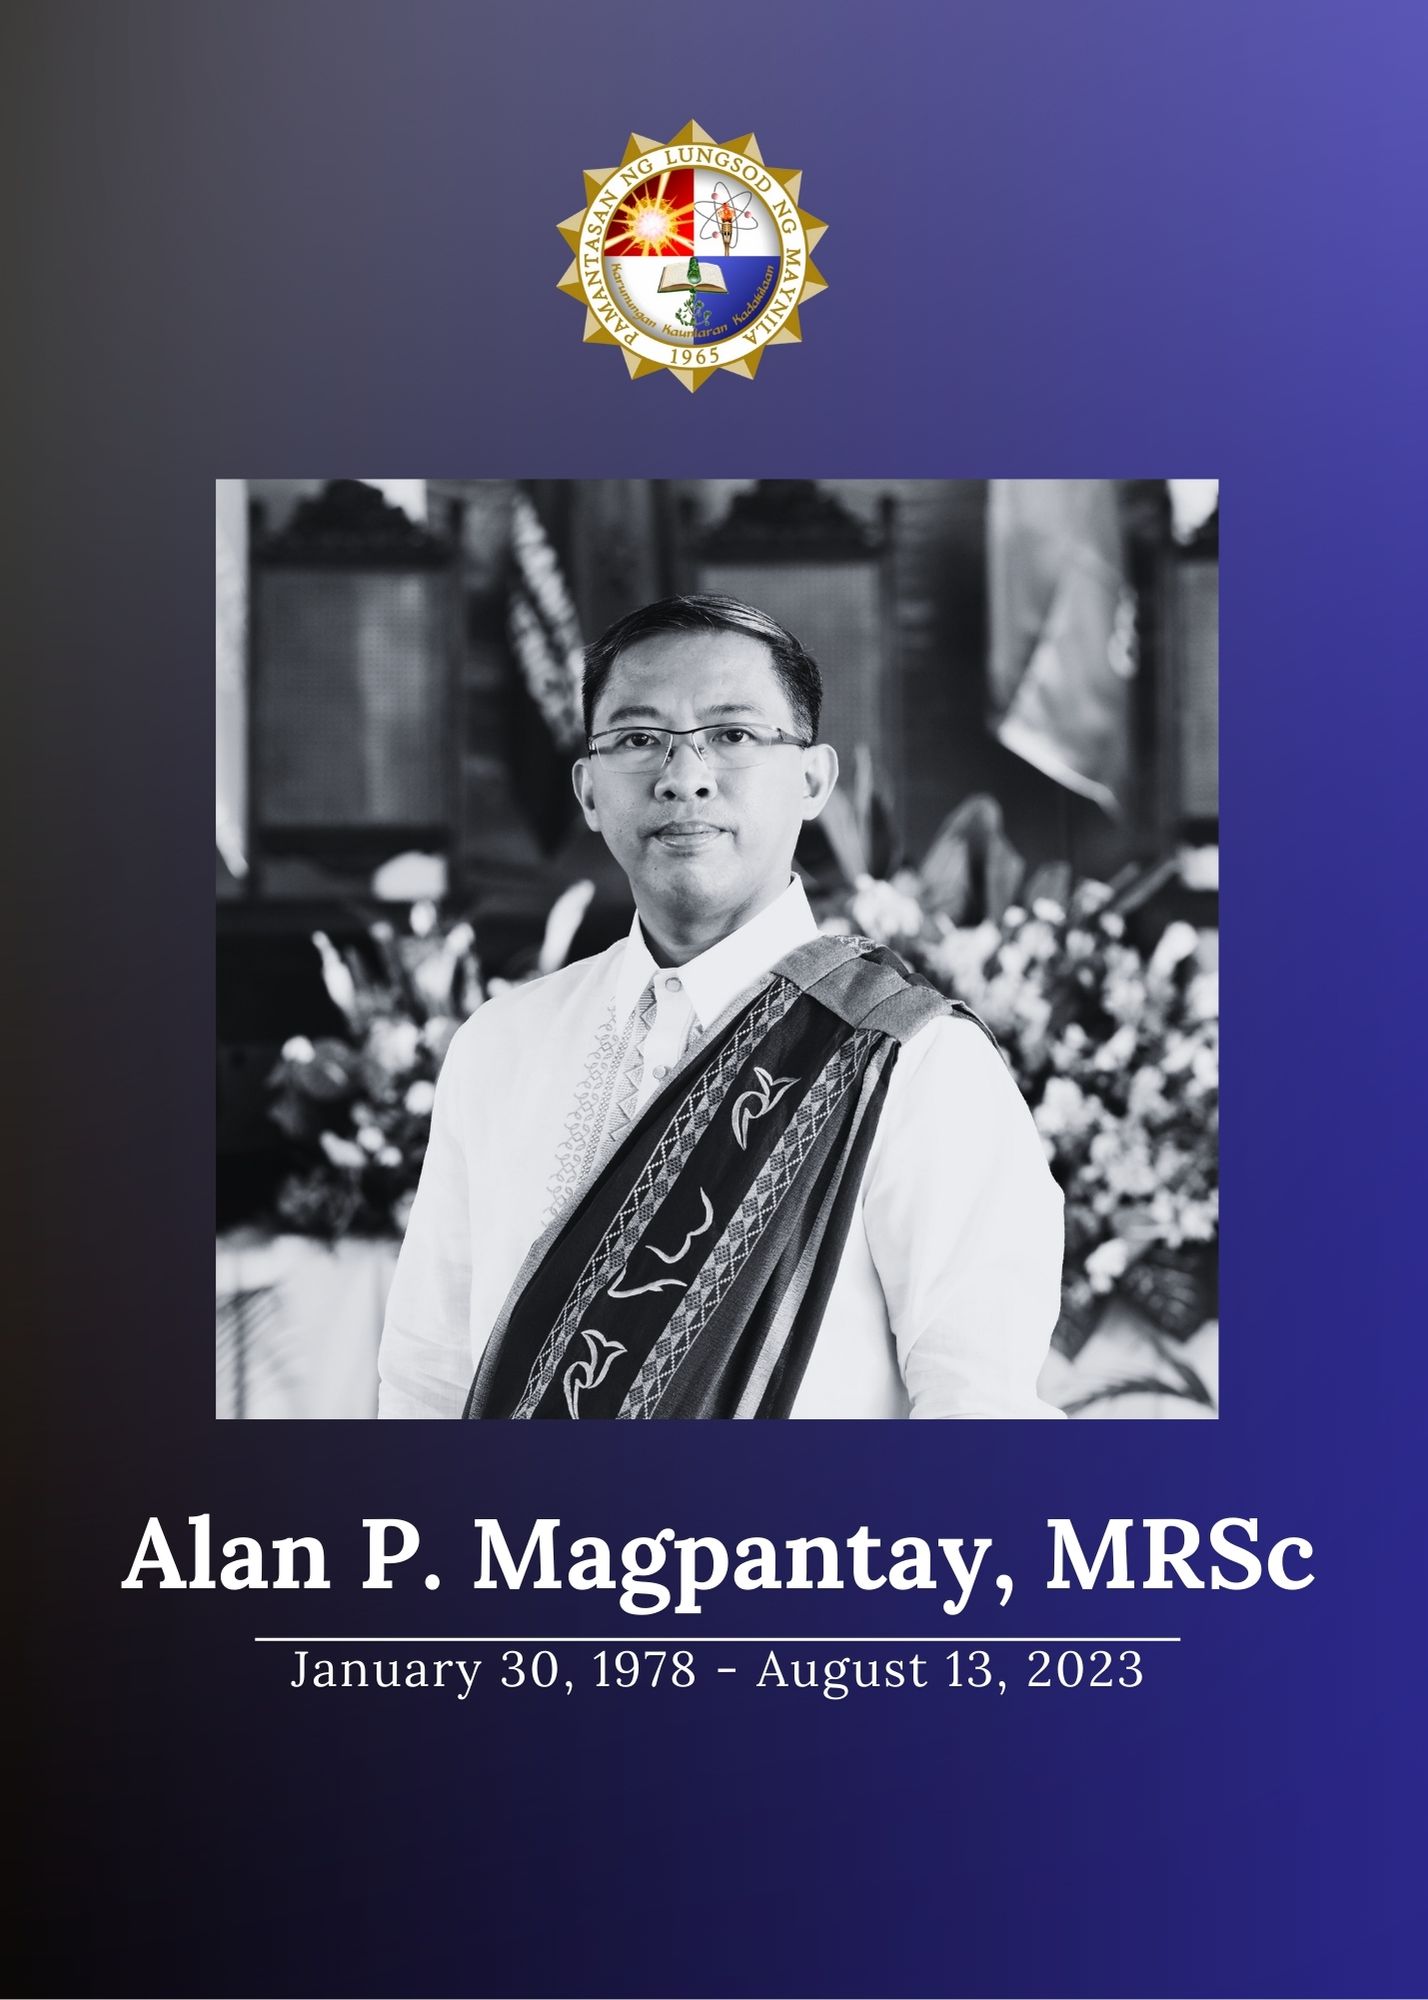 Prof. Alan Magpantay, MRSc, Dean of the College of Physical Therapy (CPT)